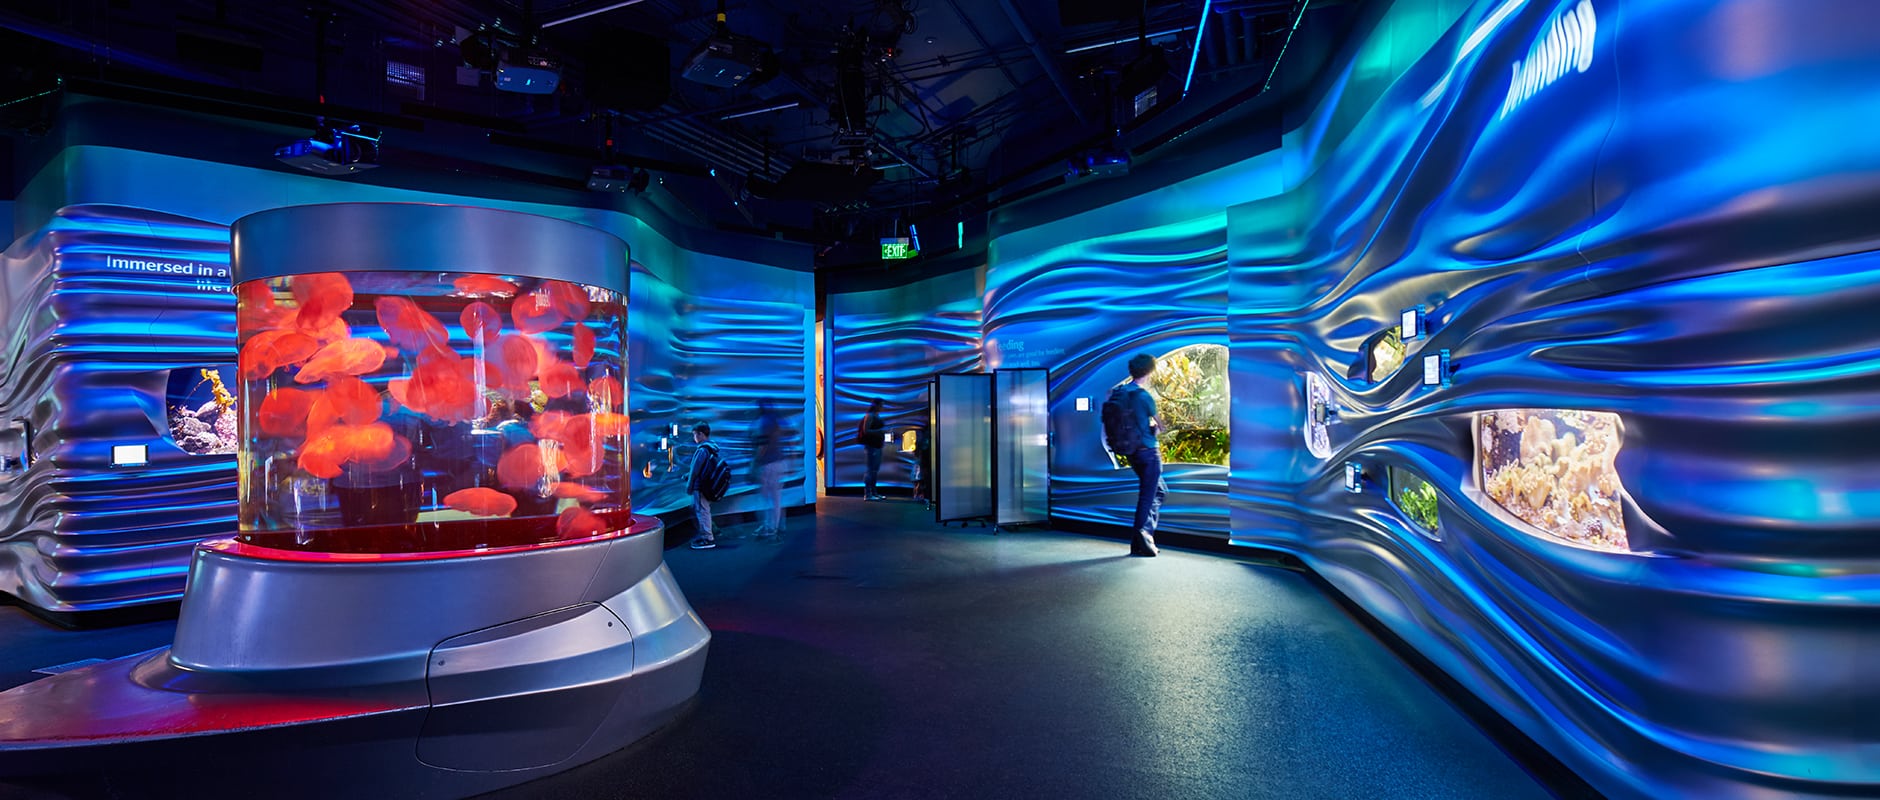 The California Academy Of Sciences: The World’s First “Double Platinum” Museum!